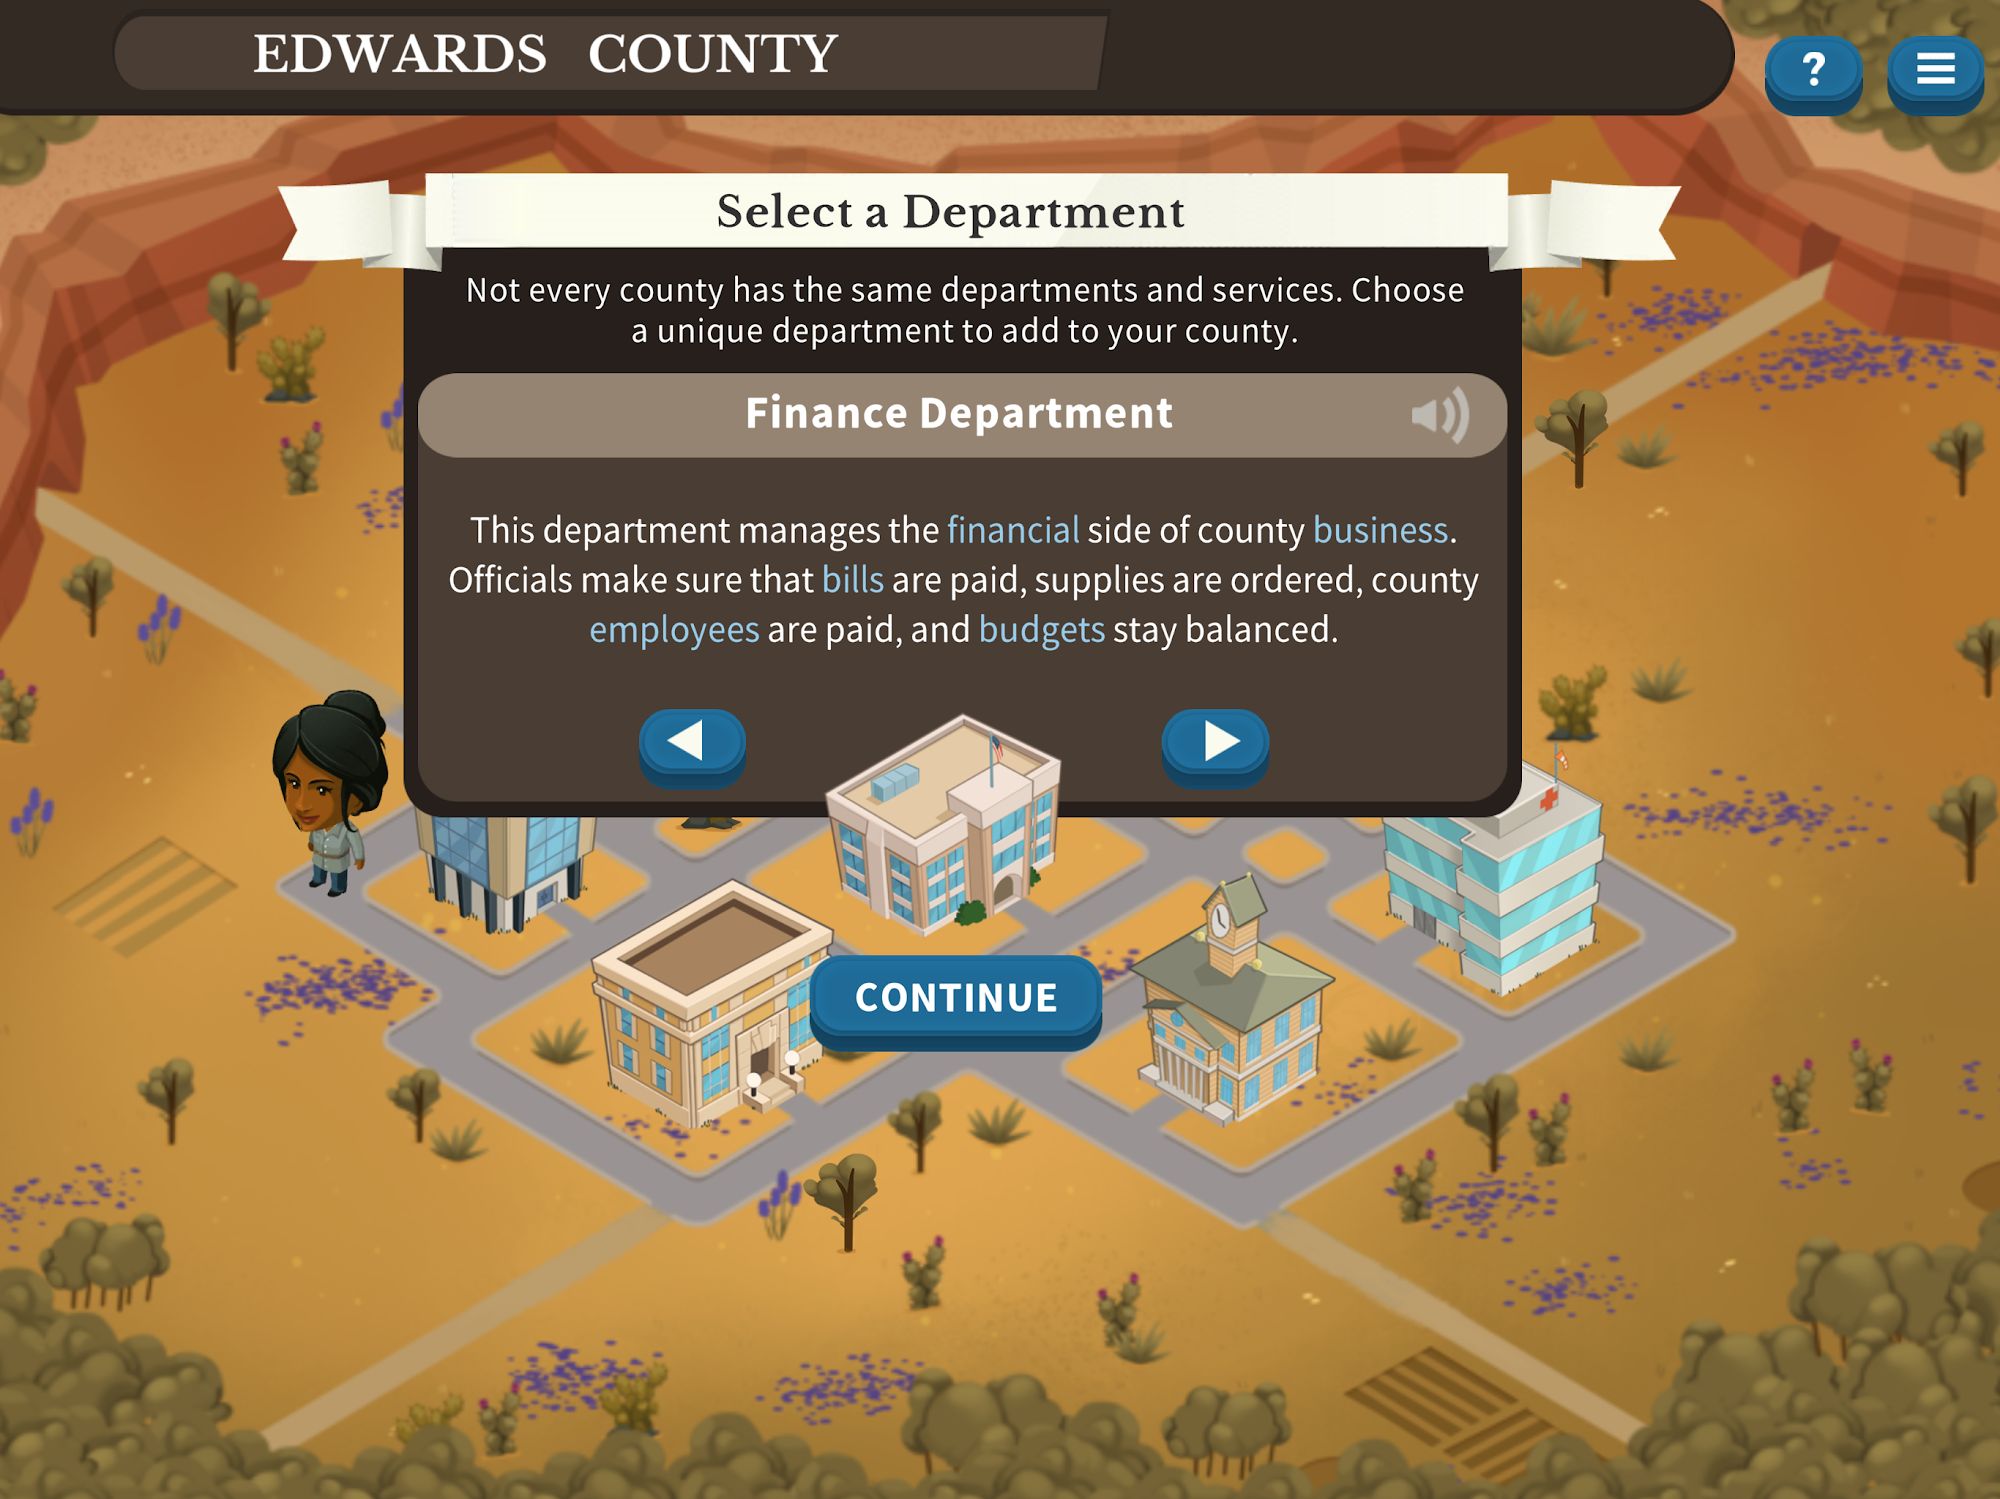 Counties Work - Android game screenshots.